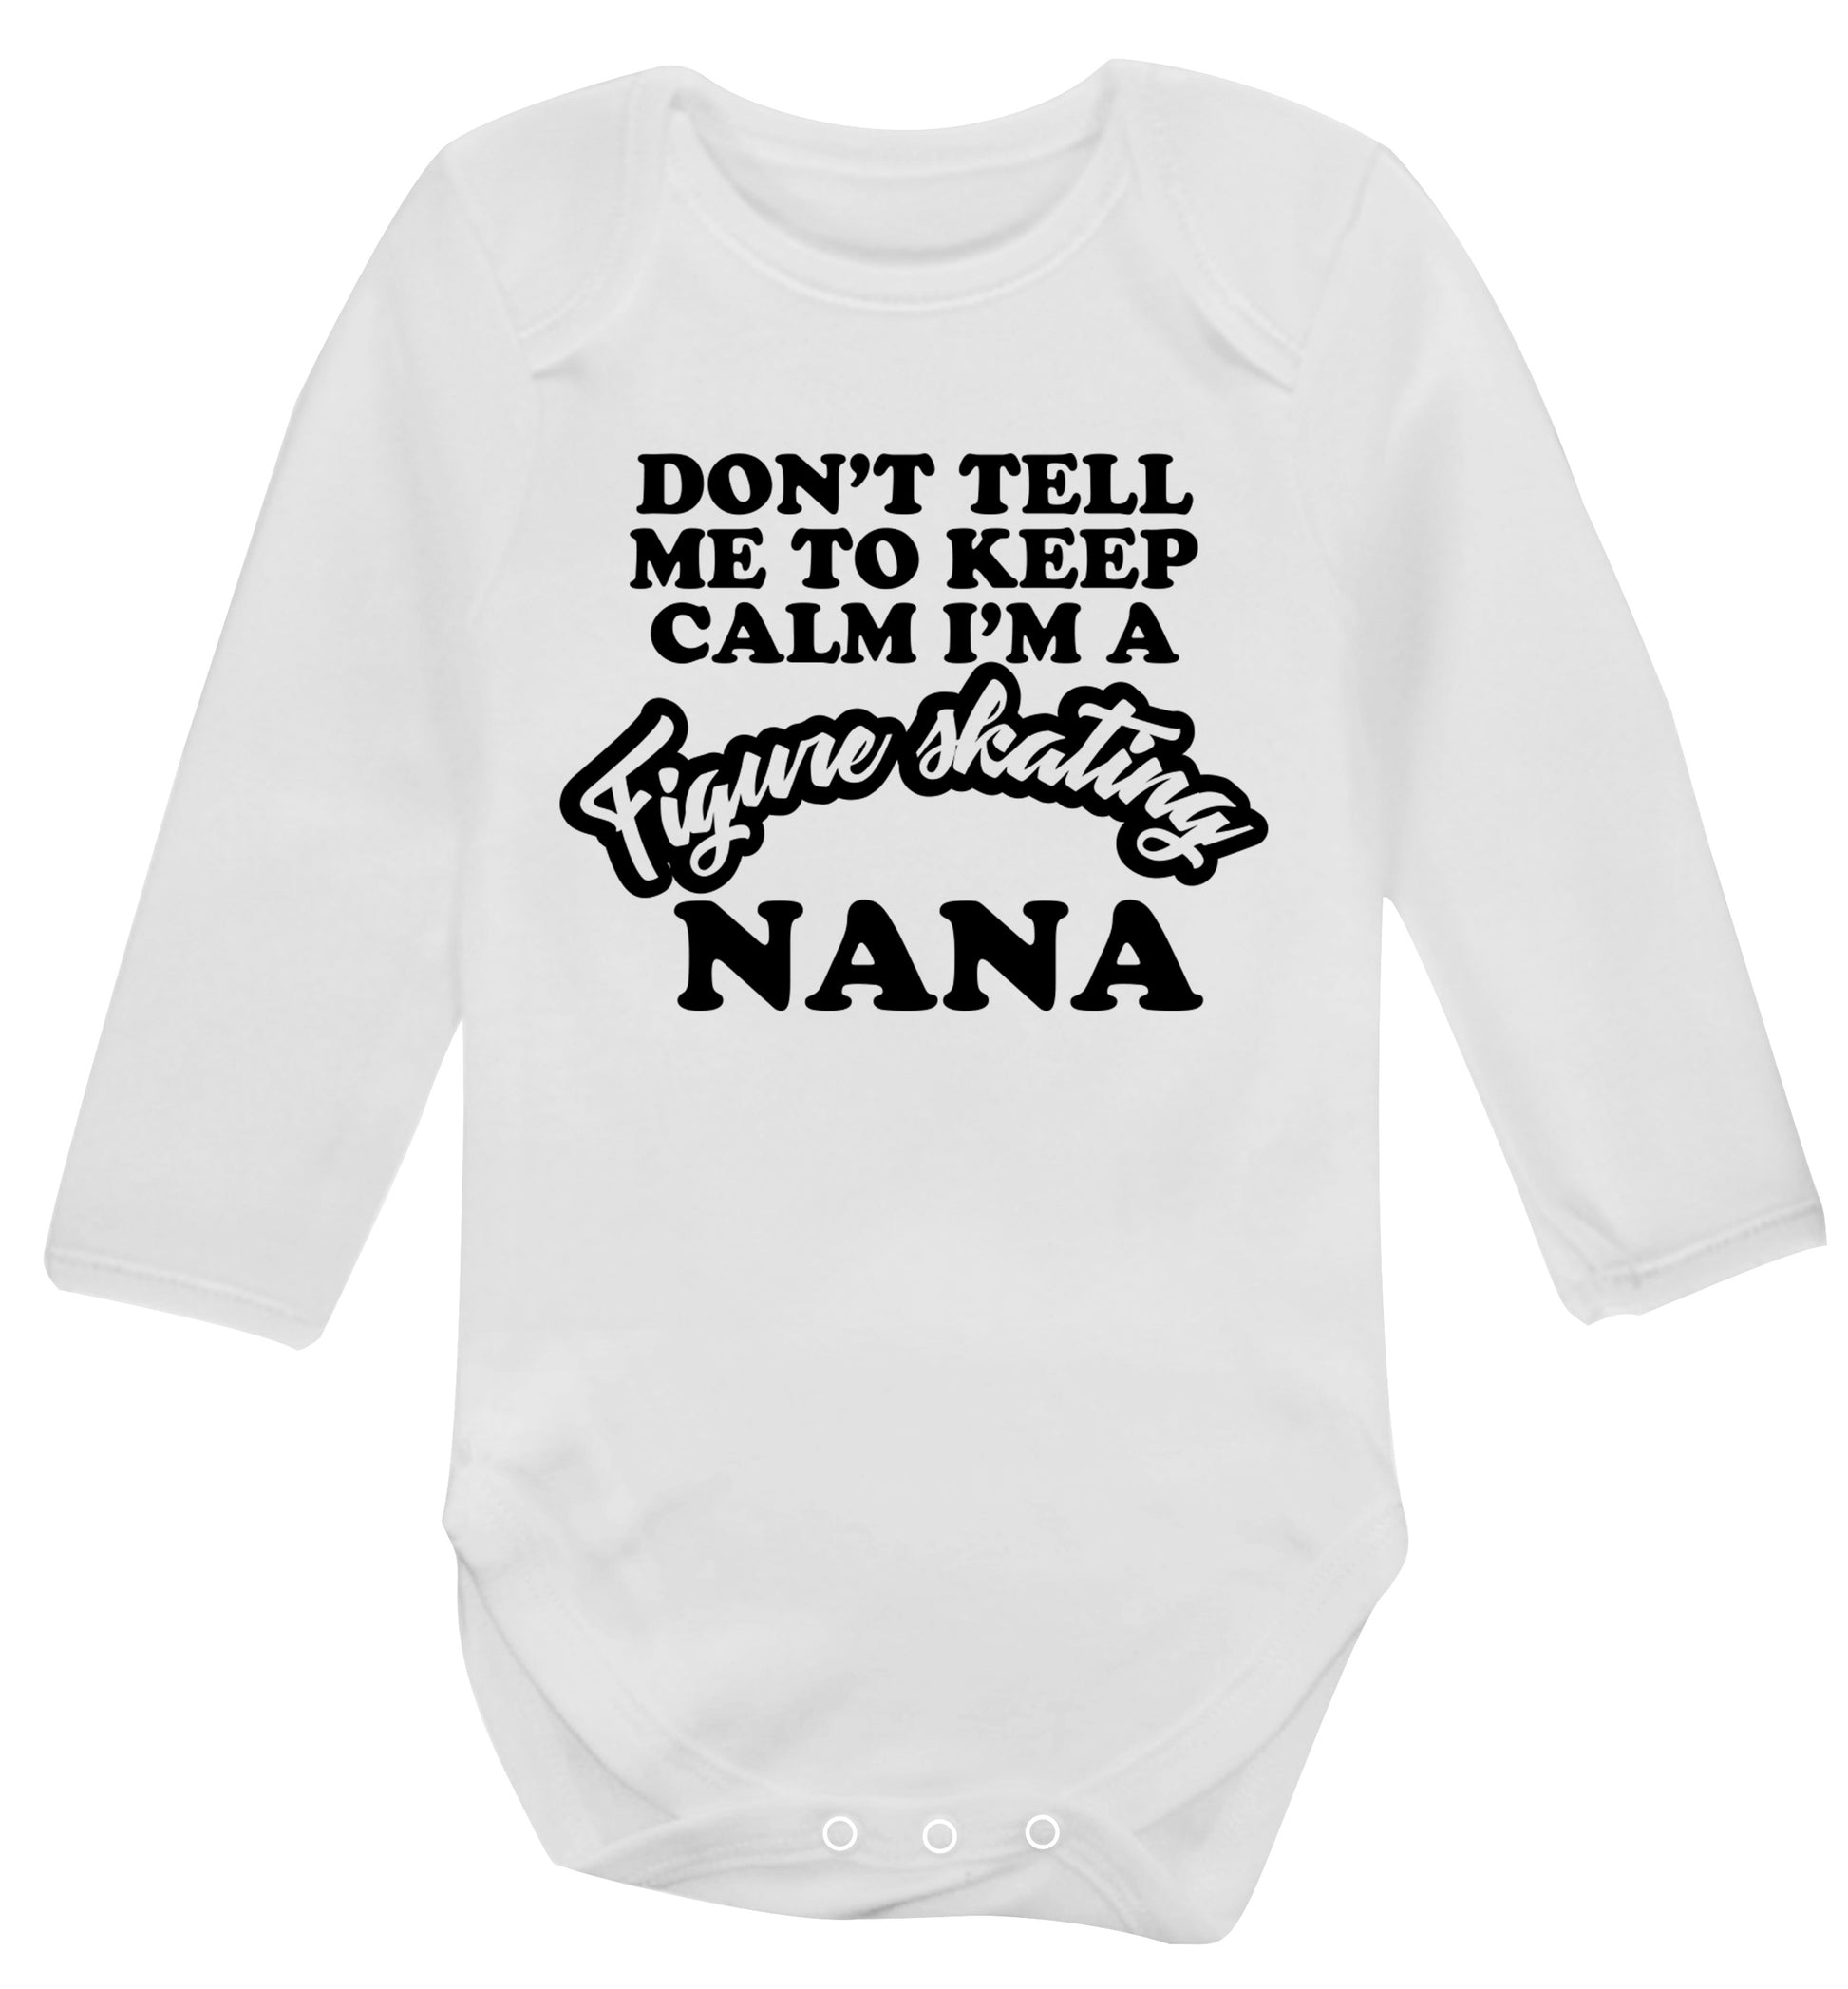 Don't tell me to keep calm I'm a figure skating nana Baby Vest long sleeved white 6-12 months